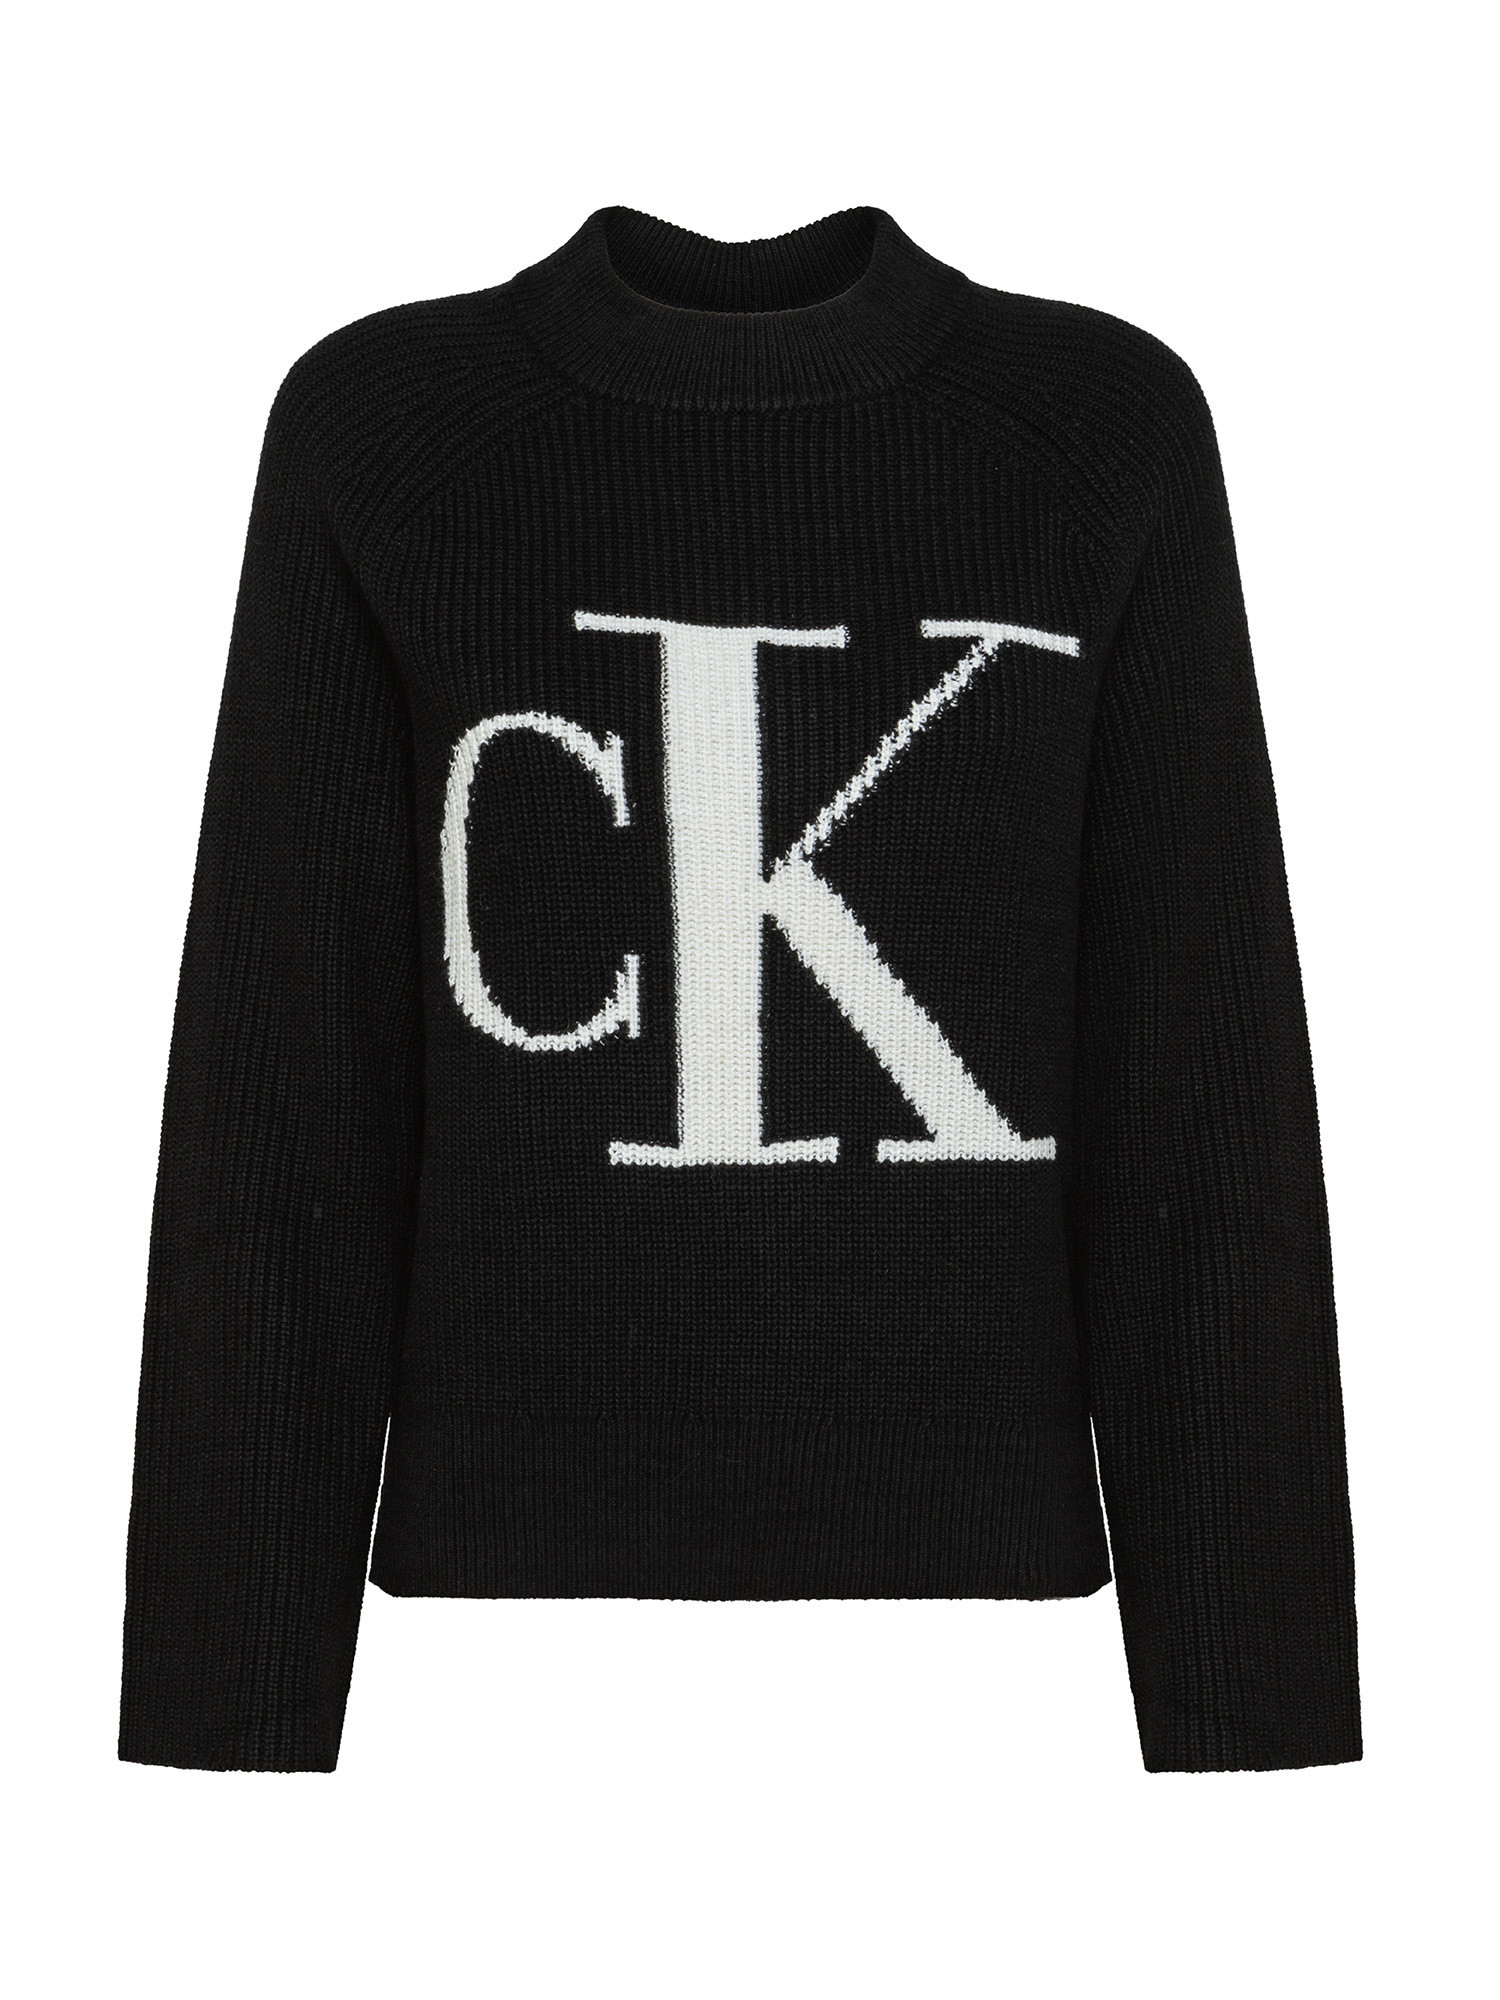 Calvin Klein Jeans - Pullover con logo, Nero, large image number 0